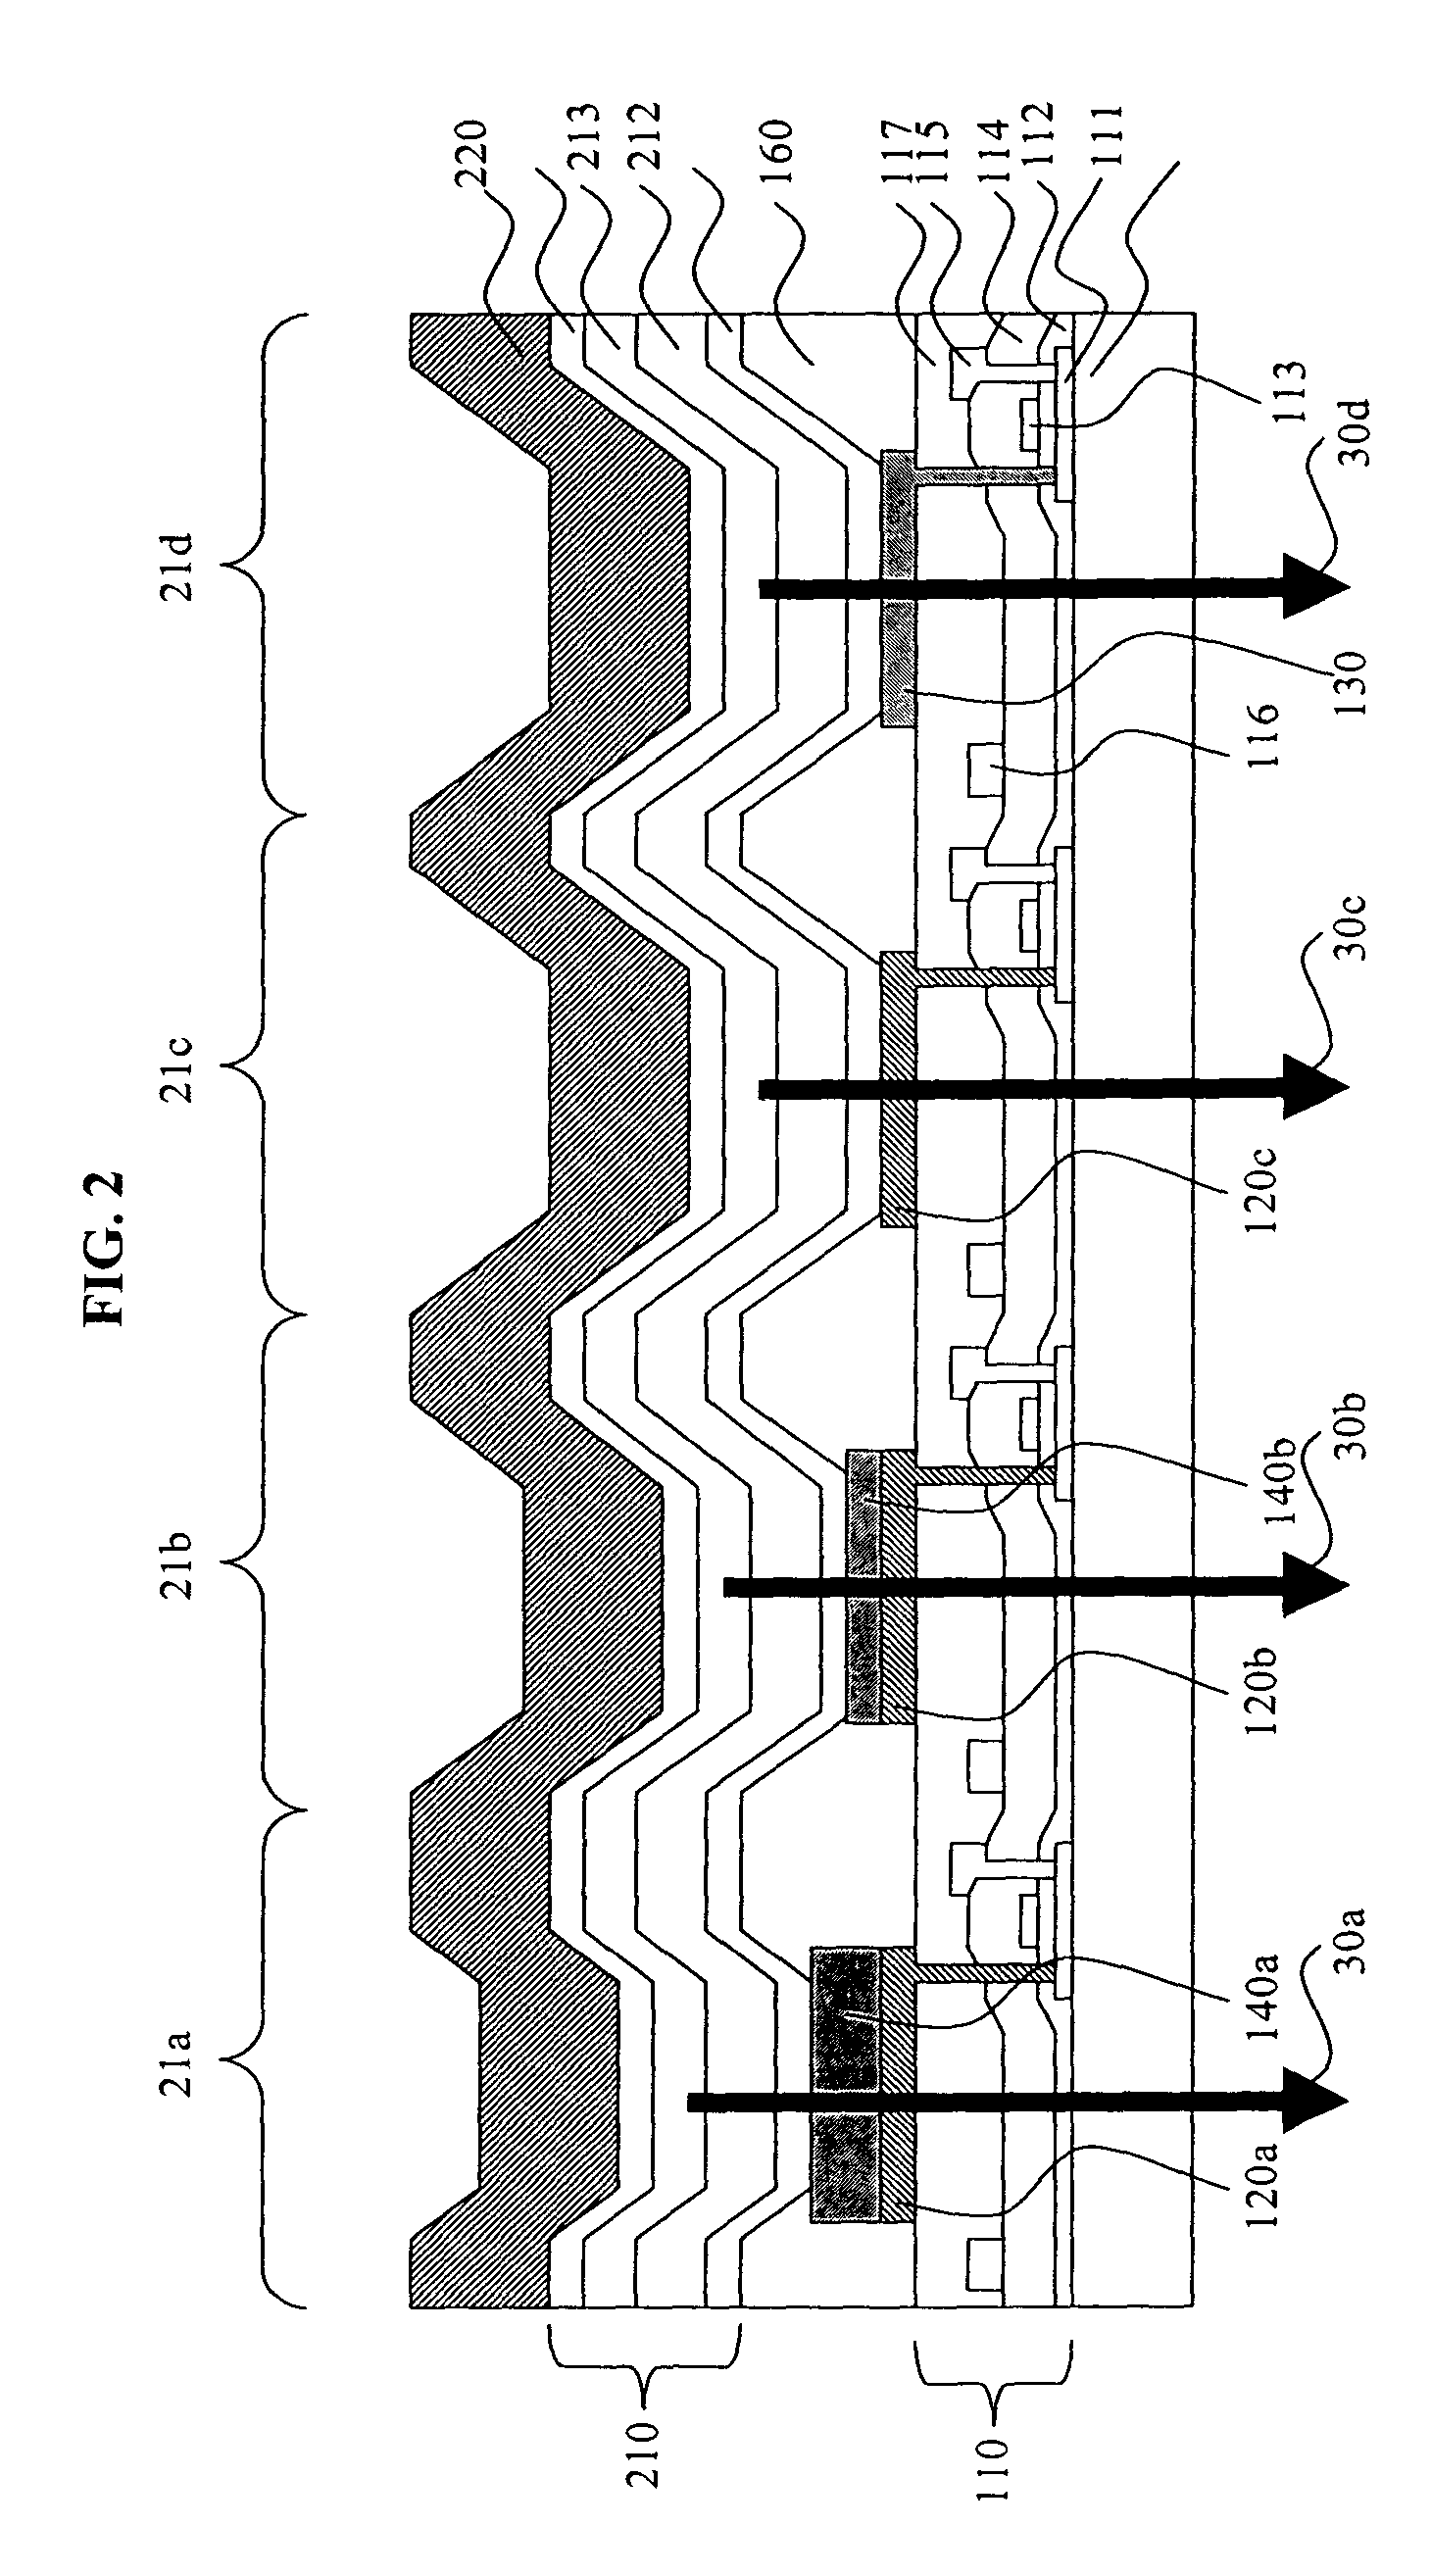 OLED device having microcavity gamut subpixels and a within gamut subpixel